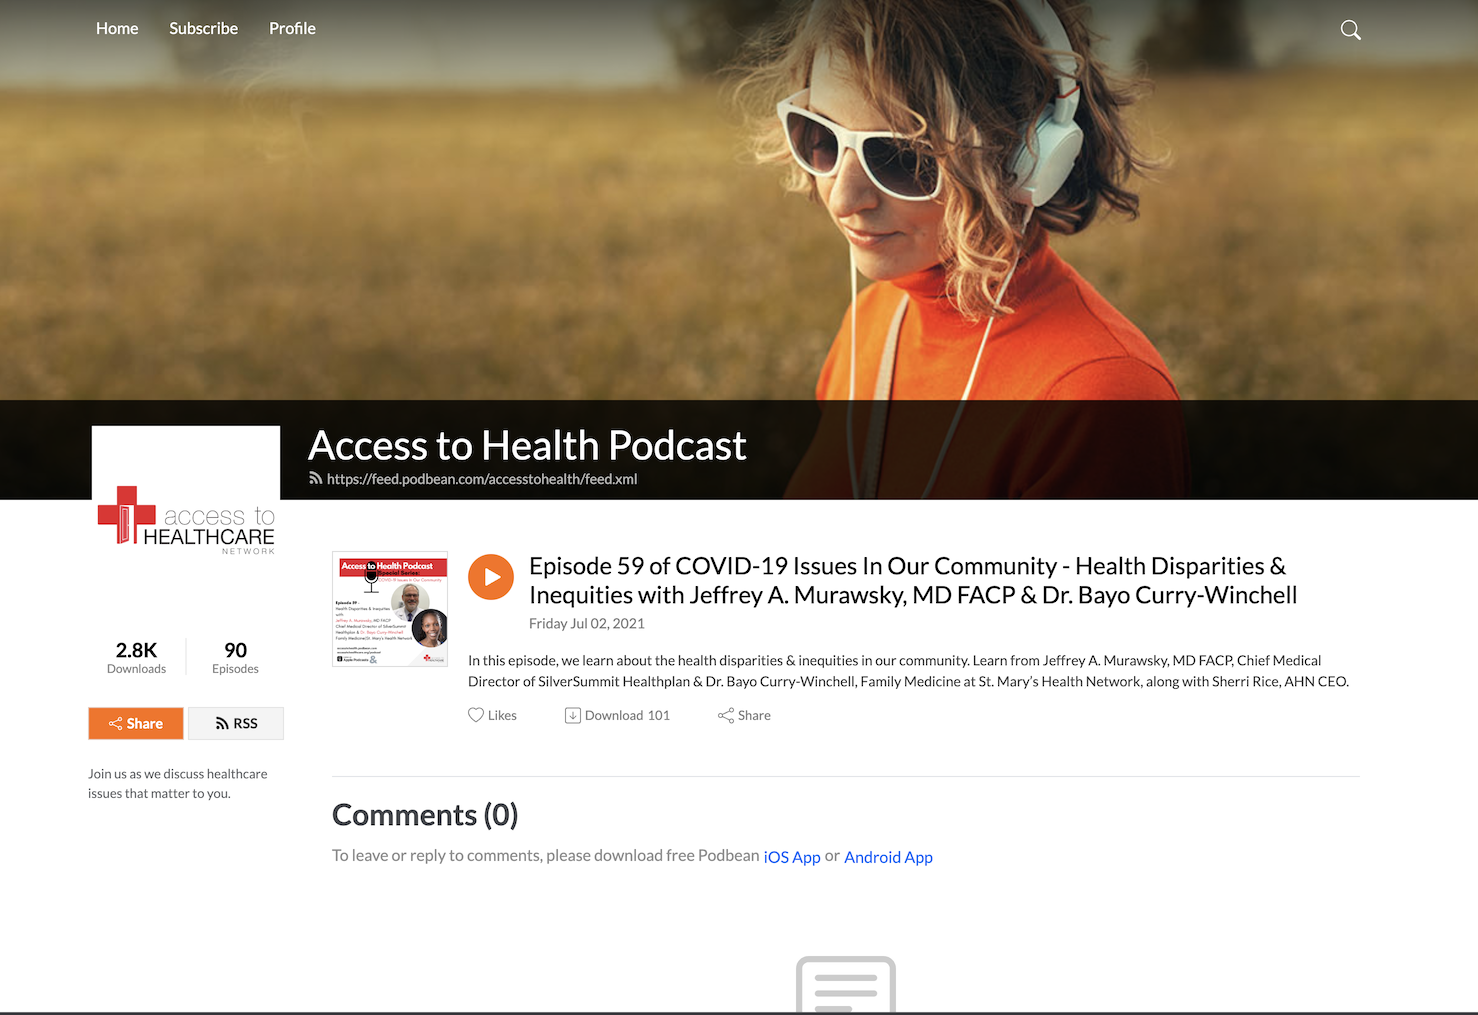 Access to Healthcare Podcast with Dr. BCW